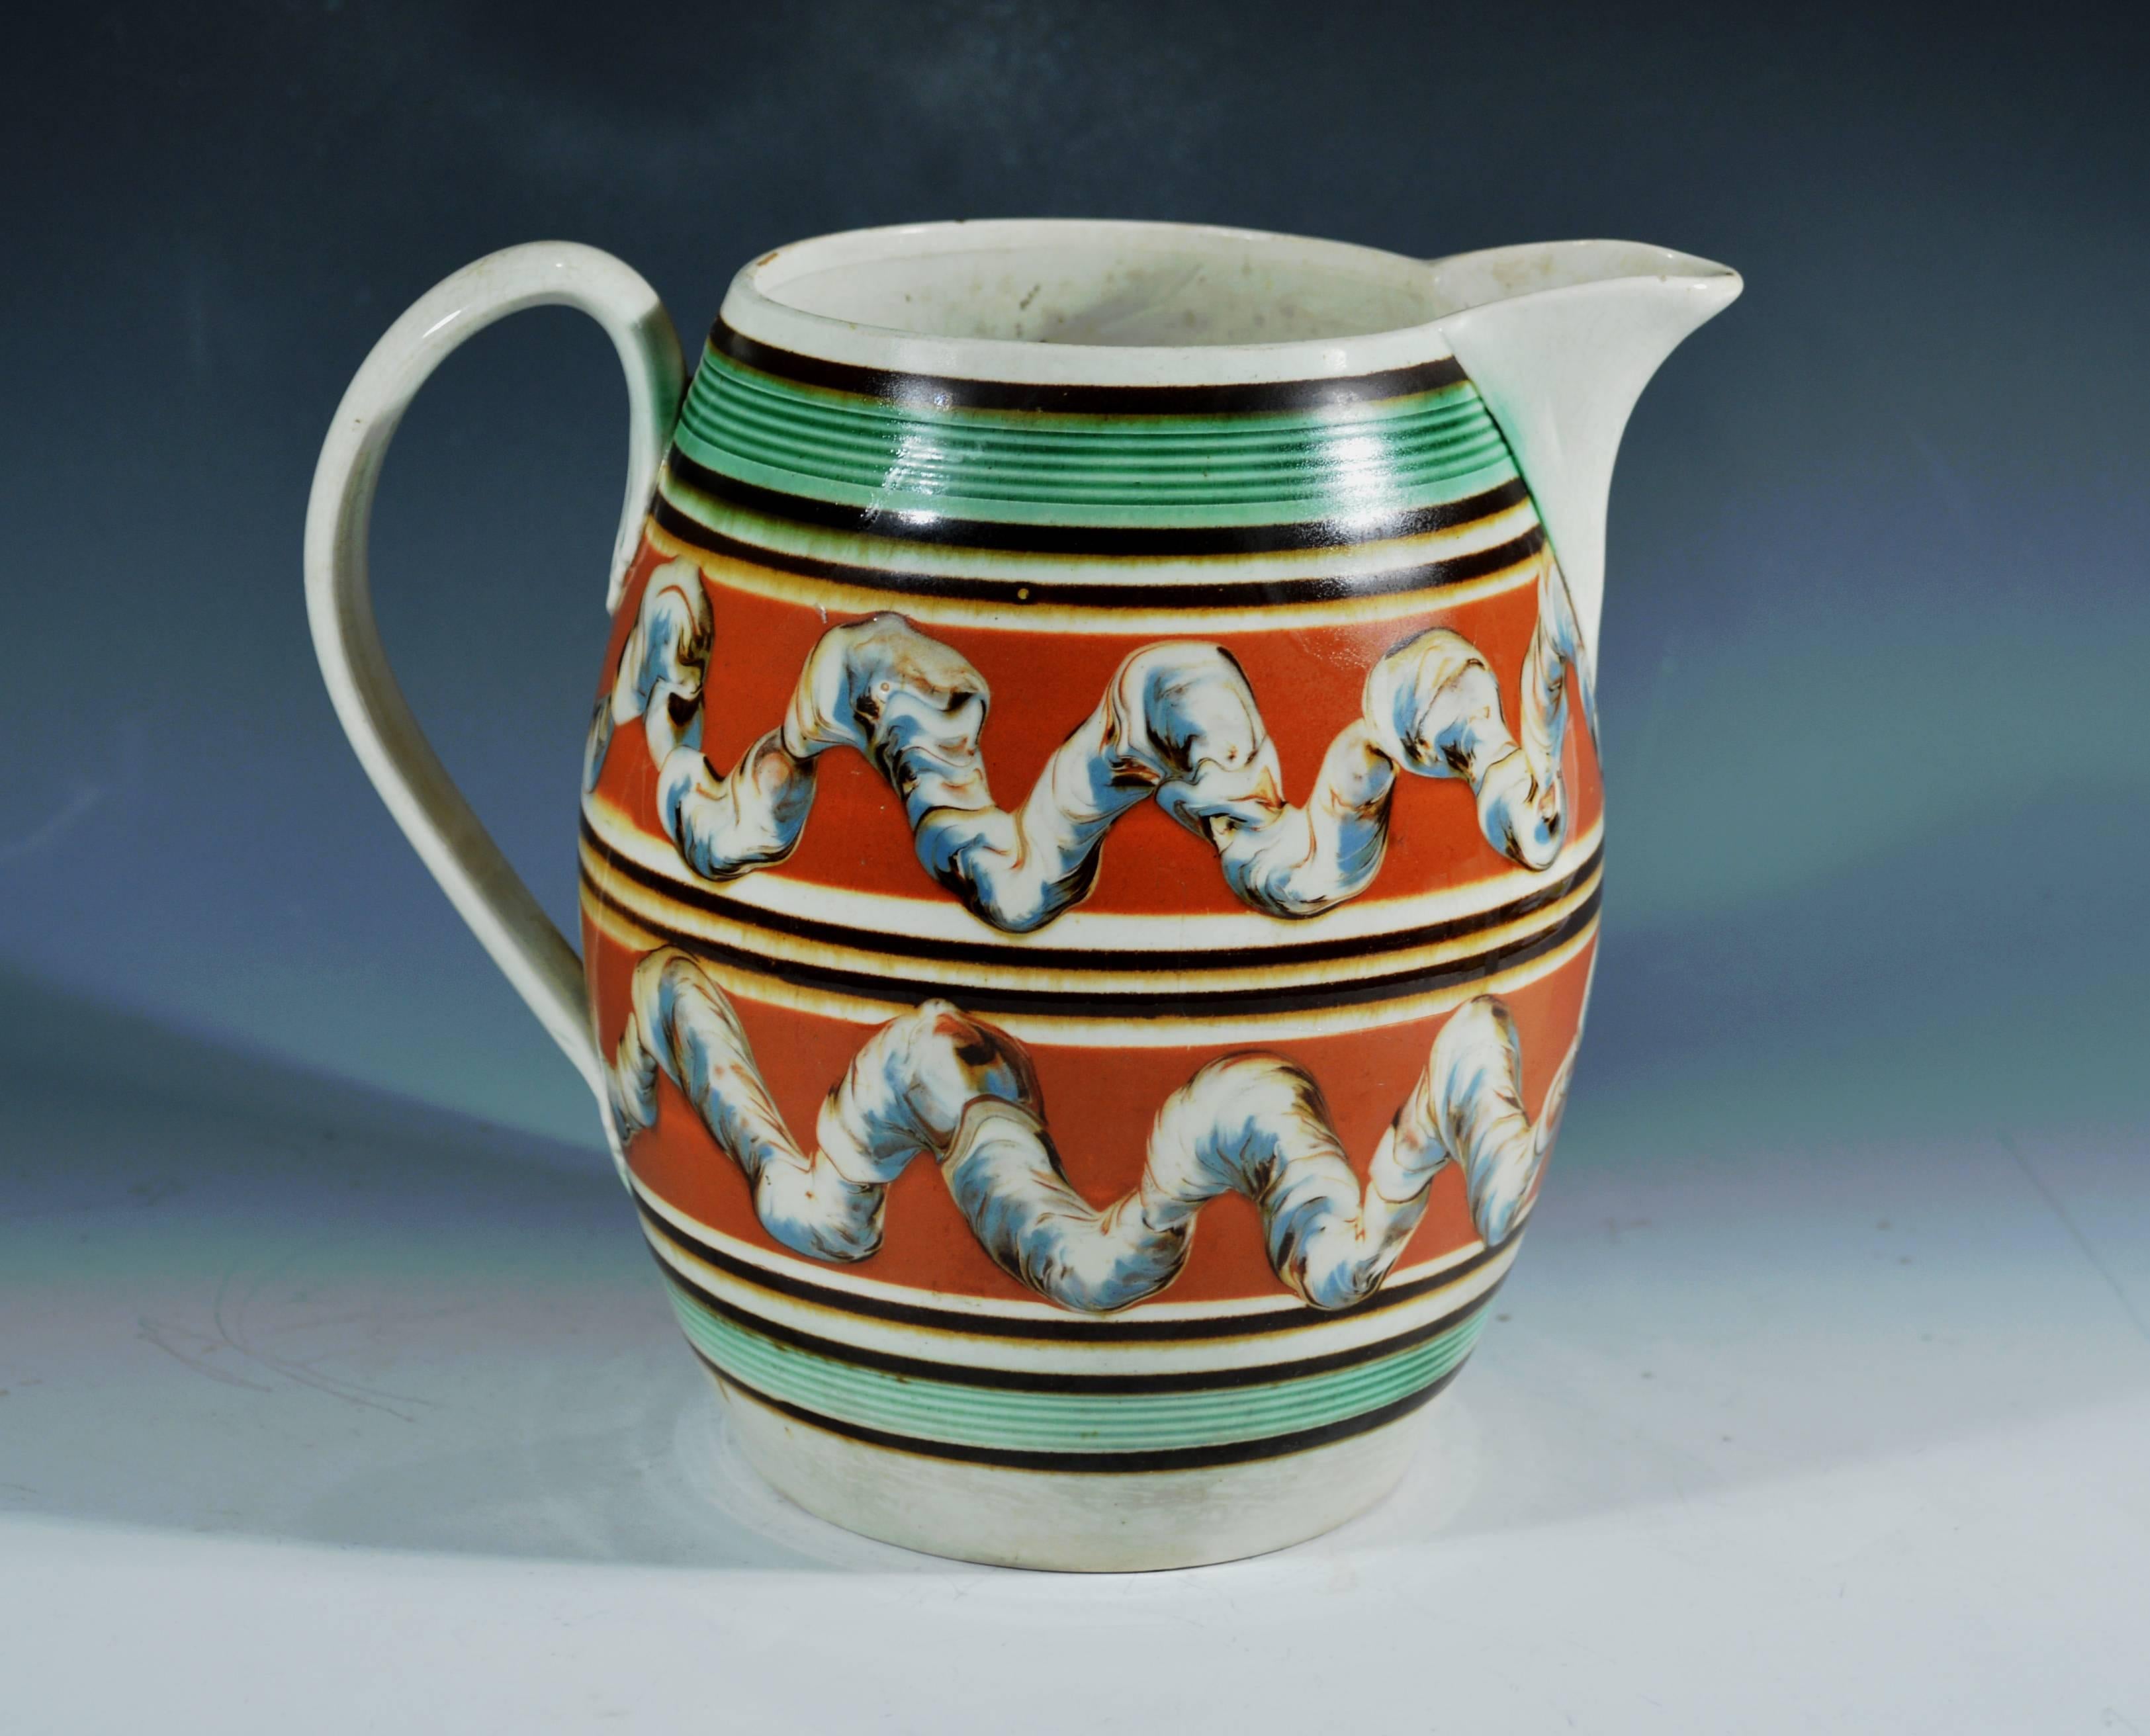 Creamware double earthworm mocha jug, 
circa 1800-1820.

The mocha jug with green reeded bands to top and bottom with molded multiple bands of raised lines colored brown with two large bands of an ochre-ground with an earthworm design encircling